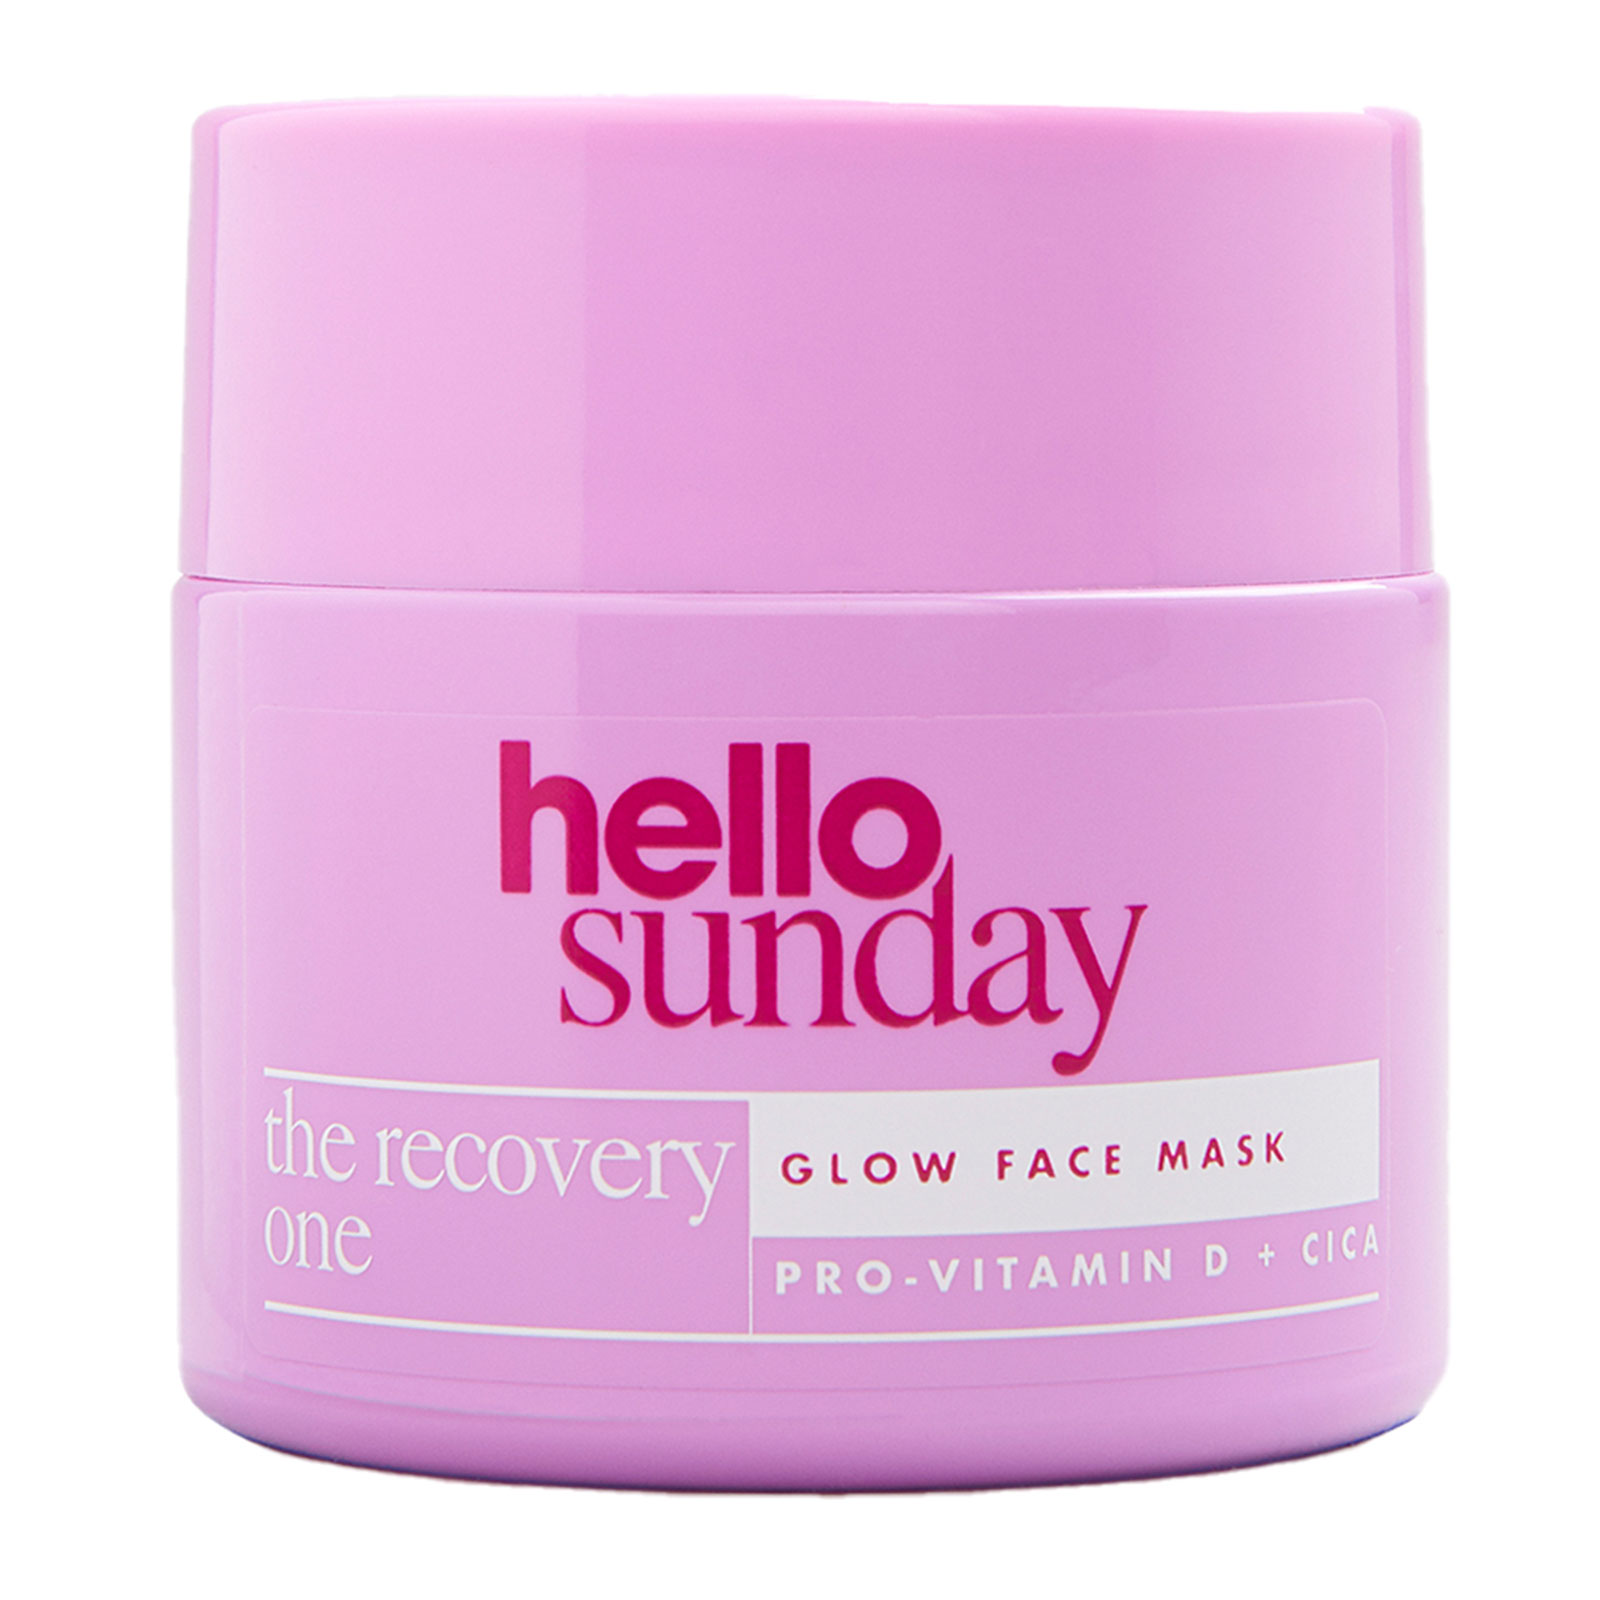 Hello Sunday The Recovery One Aftersun Glow Face Mask 50Ml